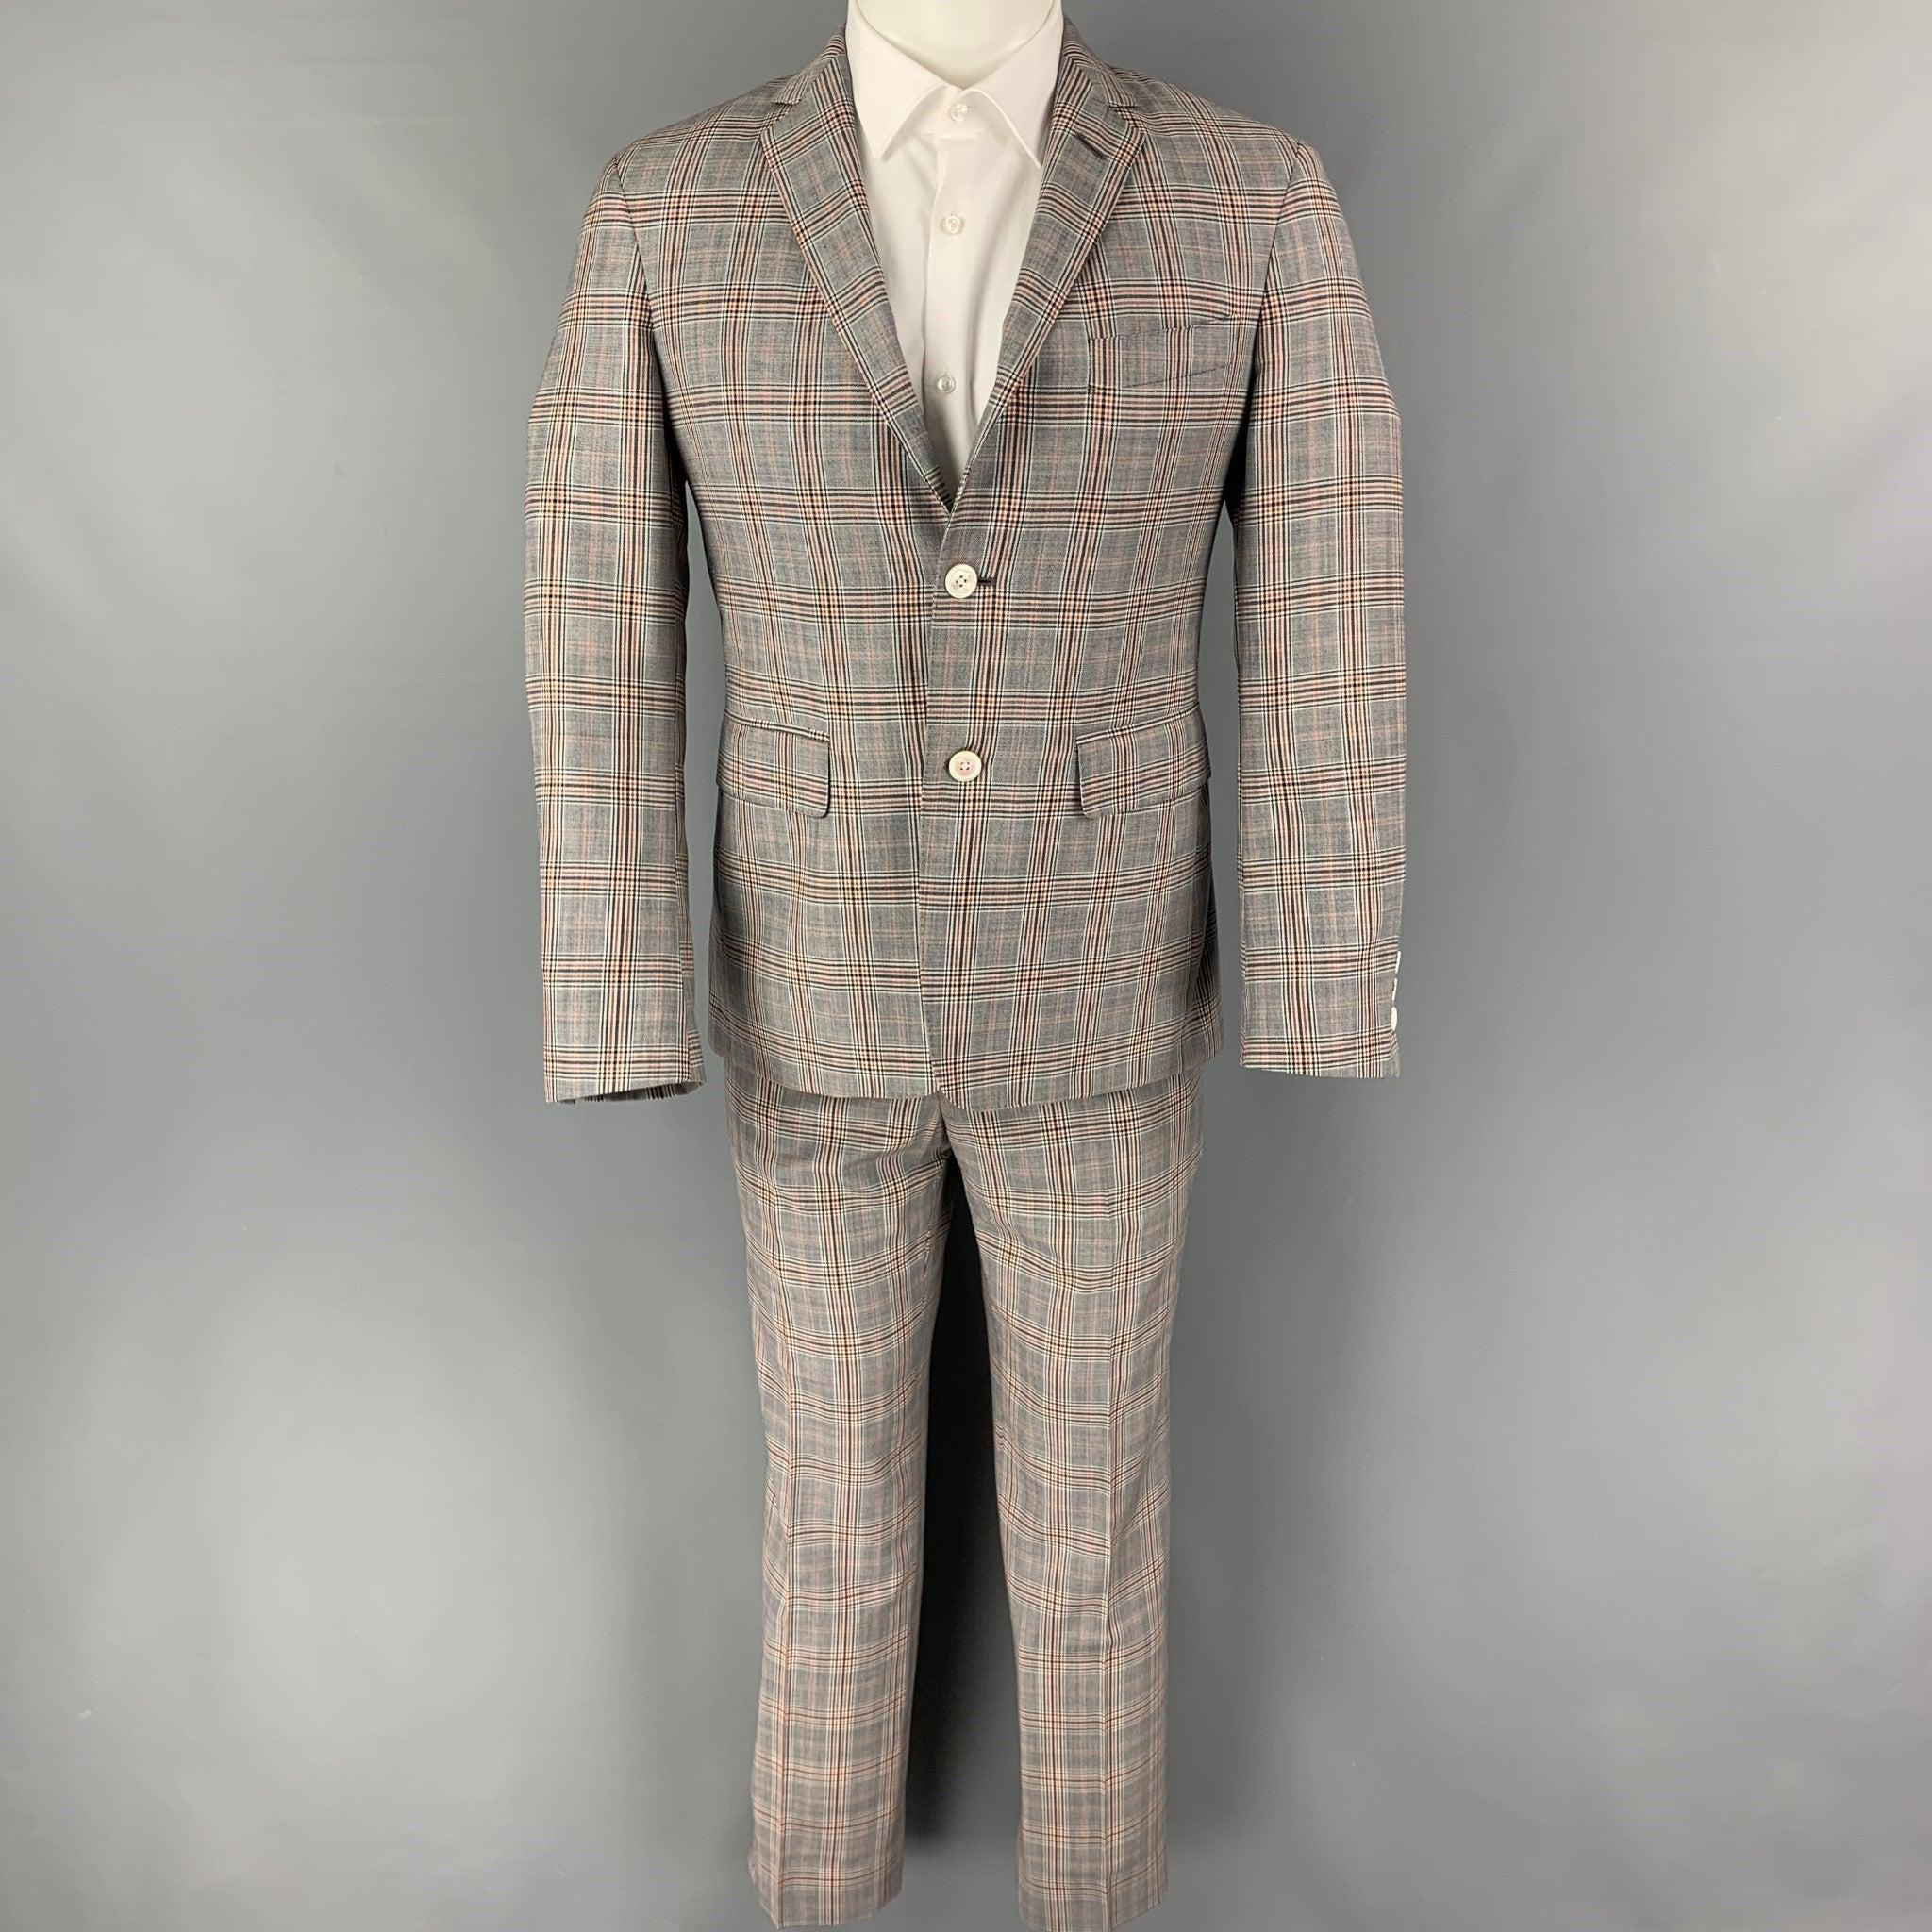 BLACK FLEECE
suit comes in a grey & navy plaid wool and includes a single breasted, three button sport coat with a notch lapel and matching flat front trousers. Very Good Pre-Owned Condition. 

Marked:   BB1  

Measurements: 
  -JacketShoulder: 18